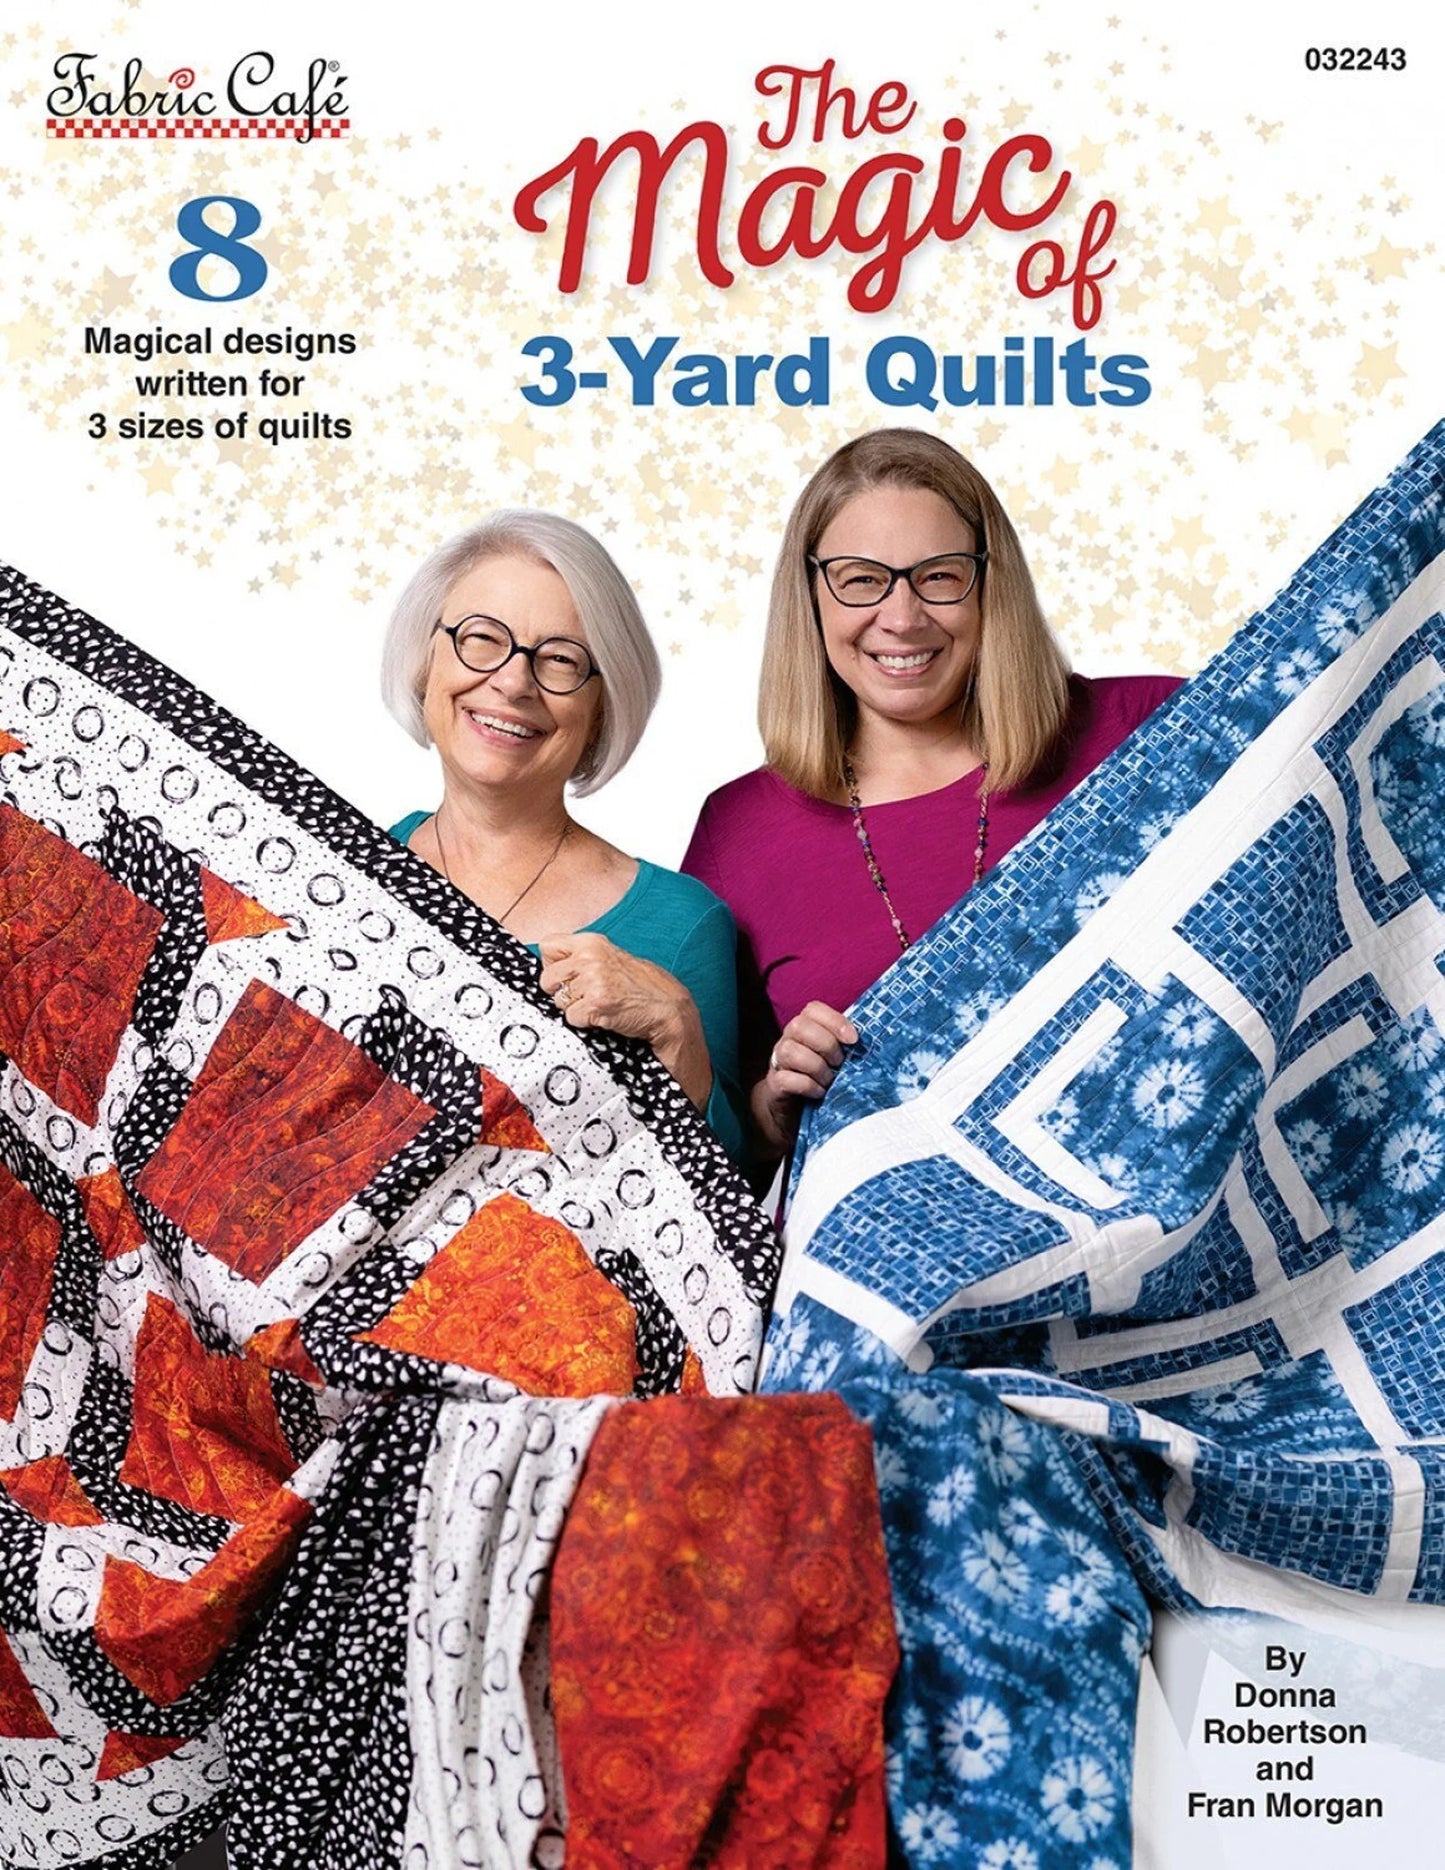 THE MAGIC OF 3 YARD QUILTS 8 quilt designs DONNA ROBERTSON For FABRIC CAFE!